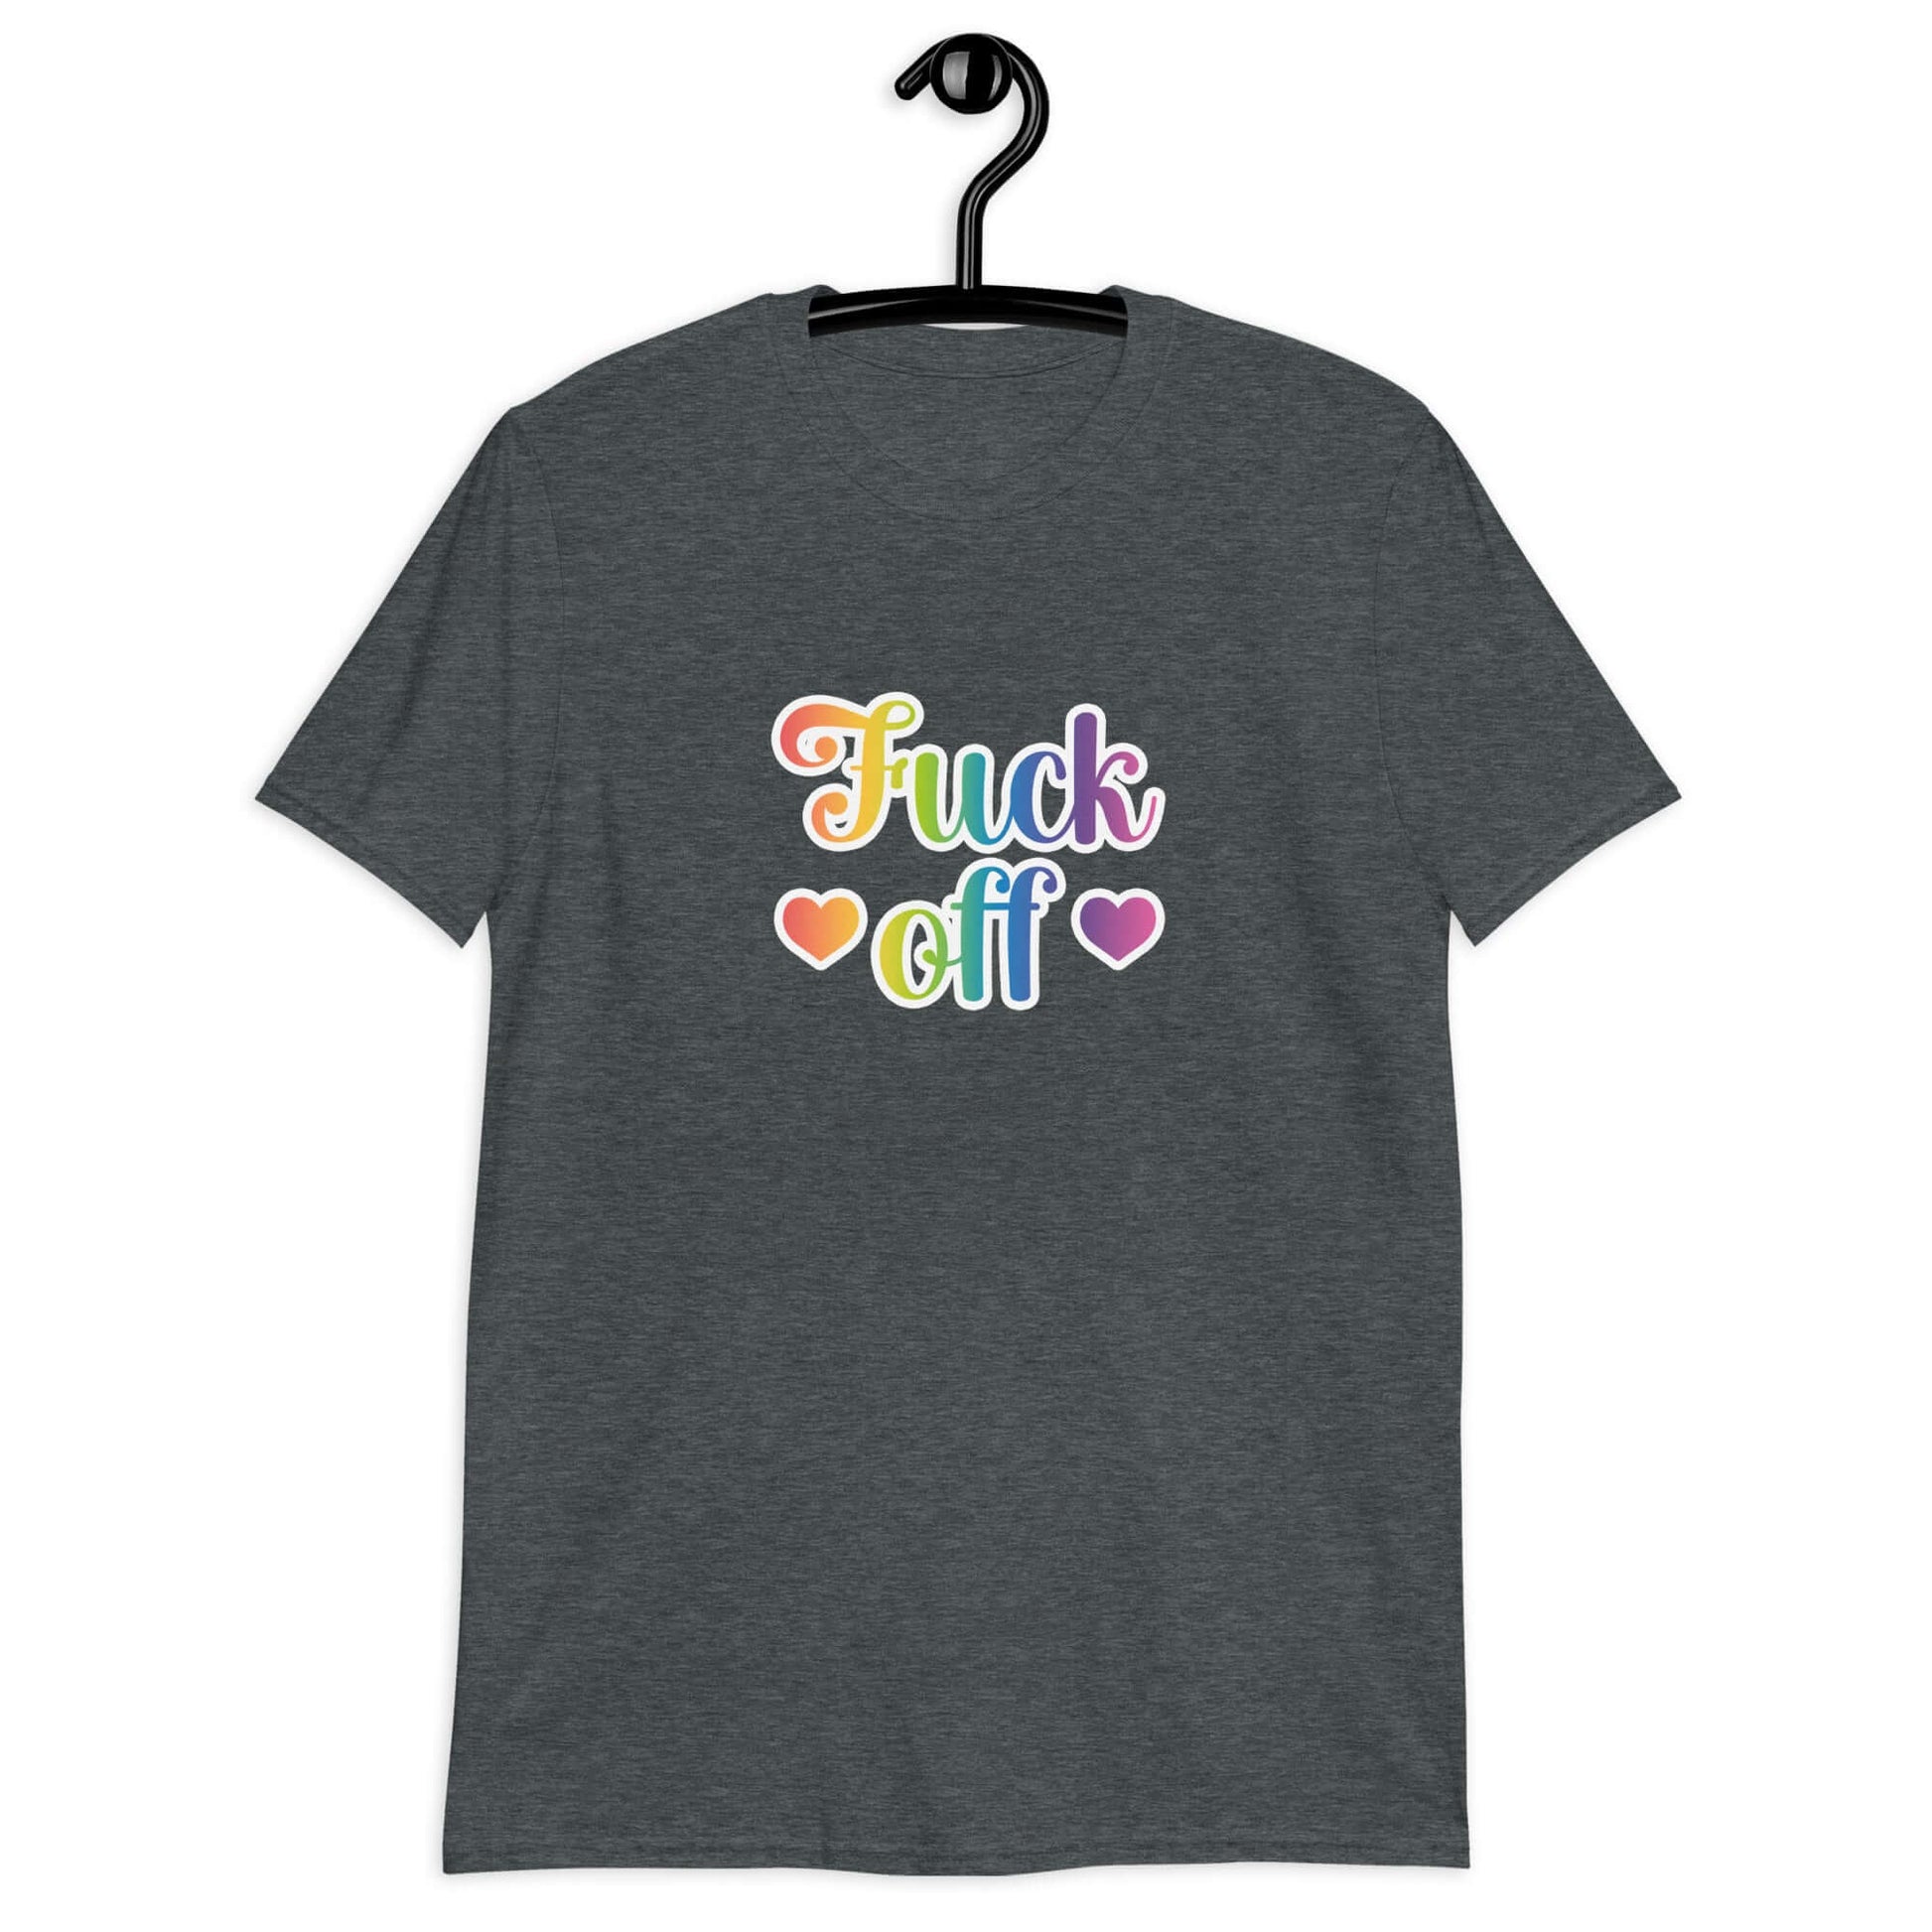 Dark heather grey t-shirt with the words Fuck off printed in 80's style rainbow font. The graphics are printed on the front of the shirt.